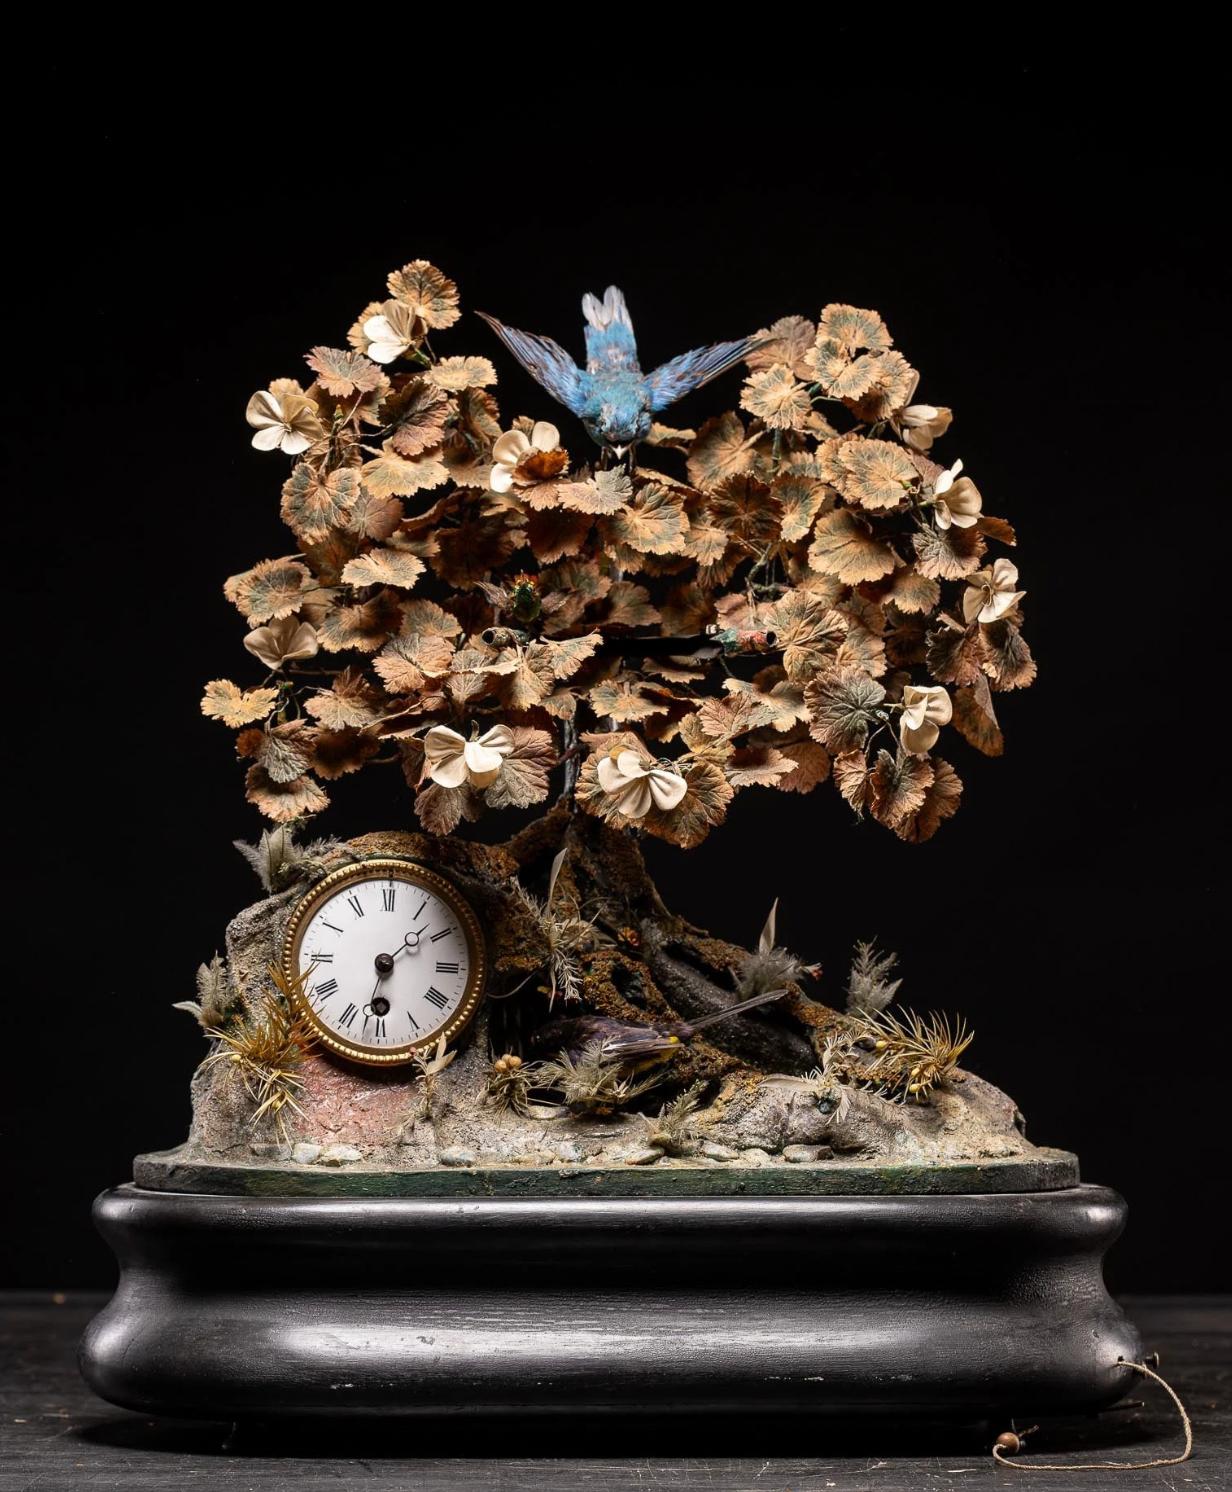 This 19th-century French automaton from the late 1800s showcases a delightful ensemble of features: three vibrant animated birds, a cascading waterfall, a tree surrounded by rocky outcrops and foliage, a tranquil pond, and a clock. Concealed within